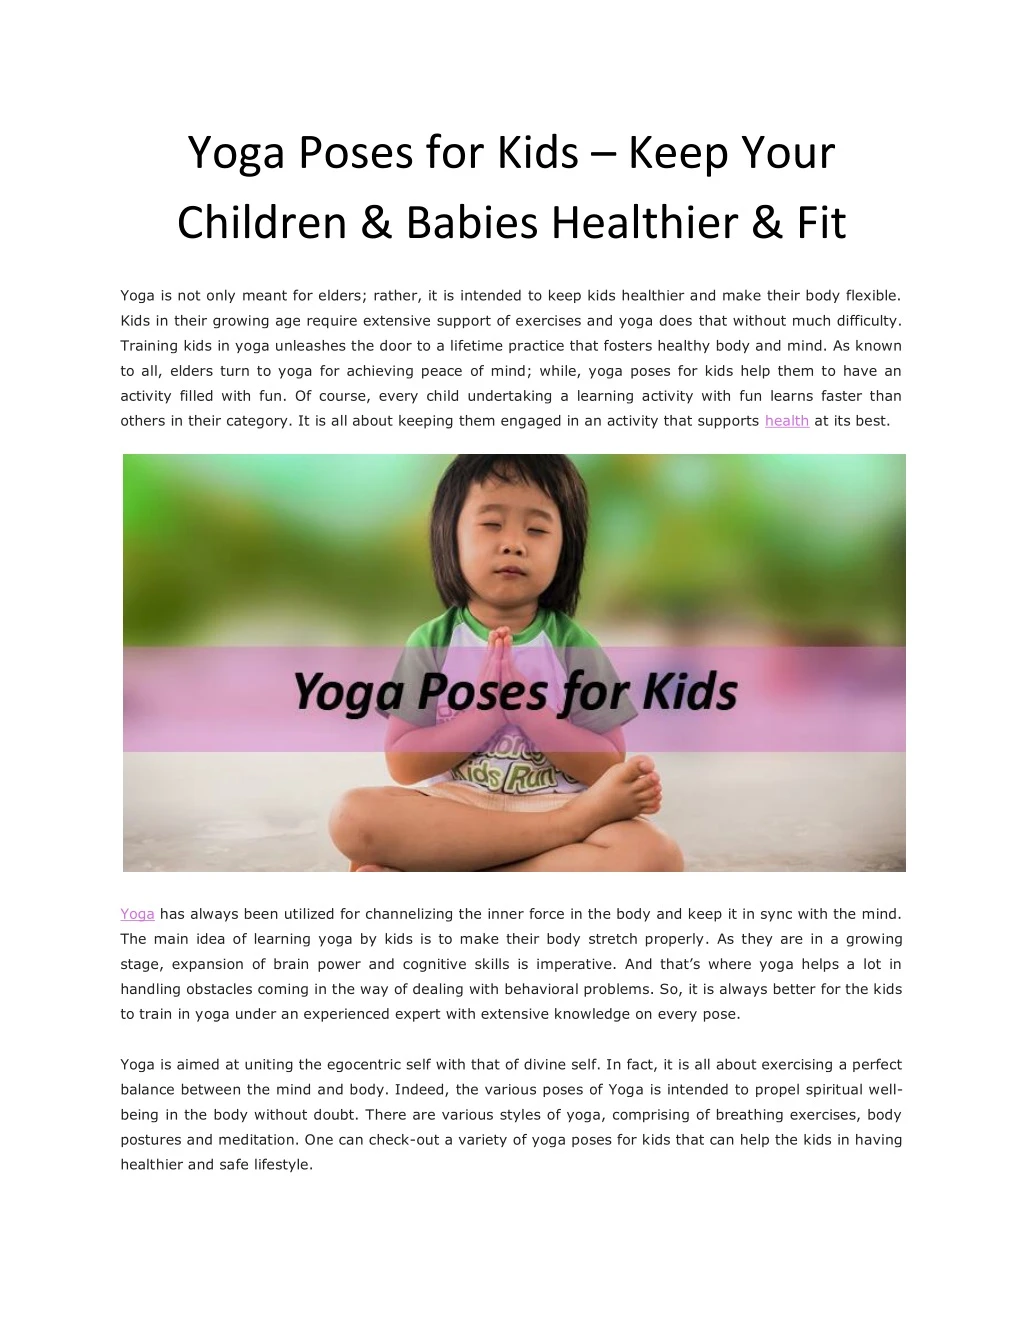 yoga poses for kids keep your children babies